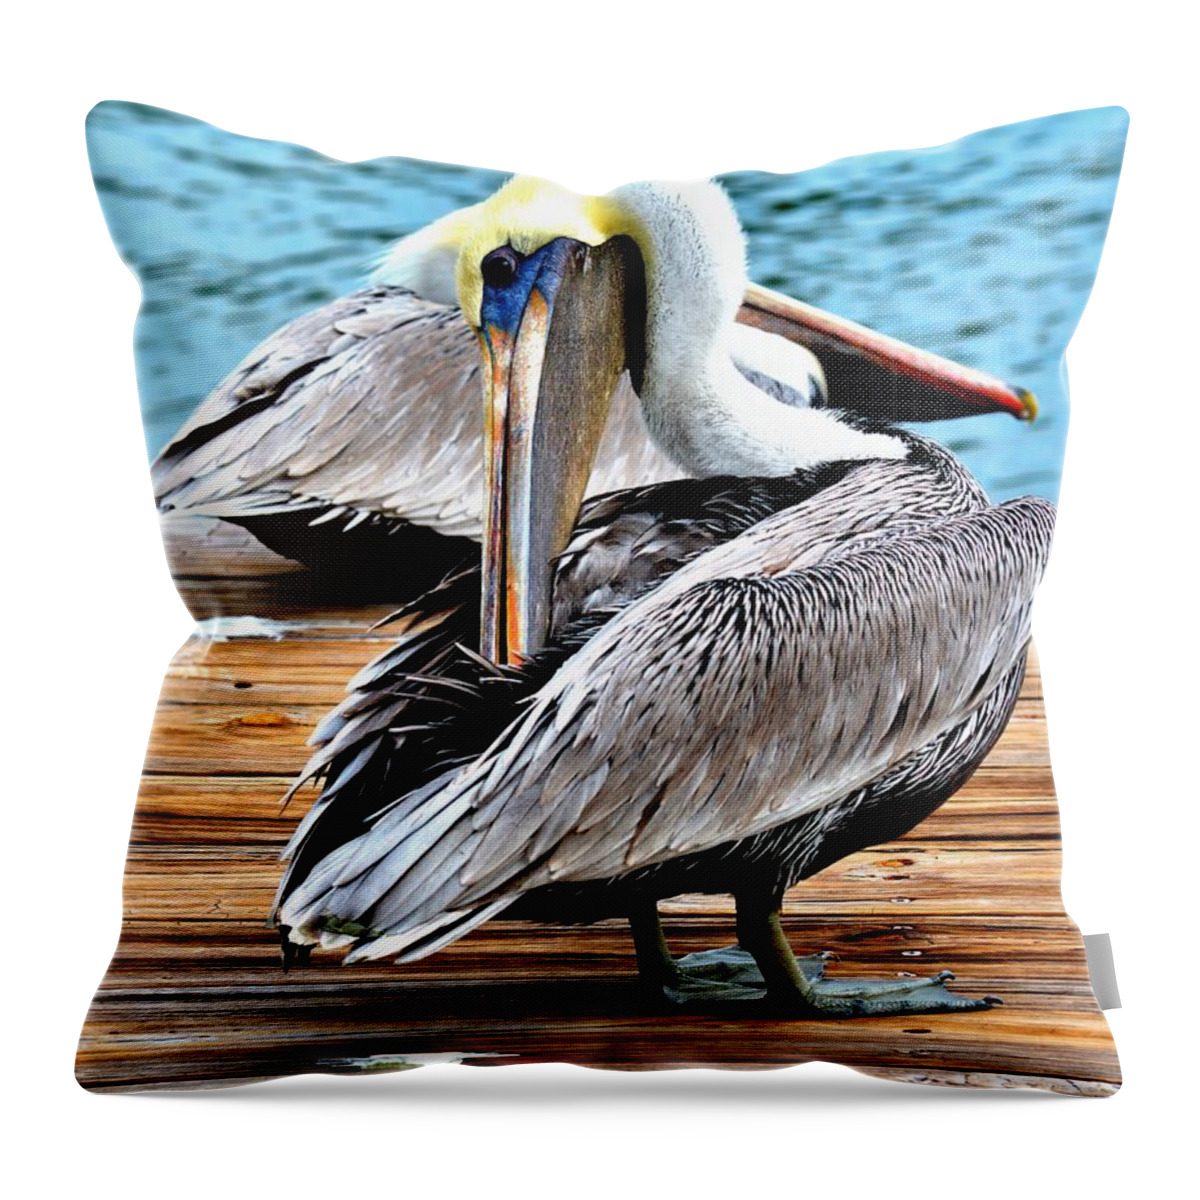 Pelican Throw Pillow featuring the digital art Pelican Ally by Alison Belsan Horton